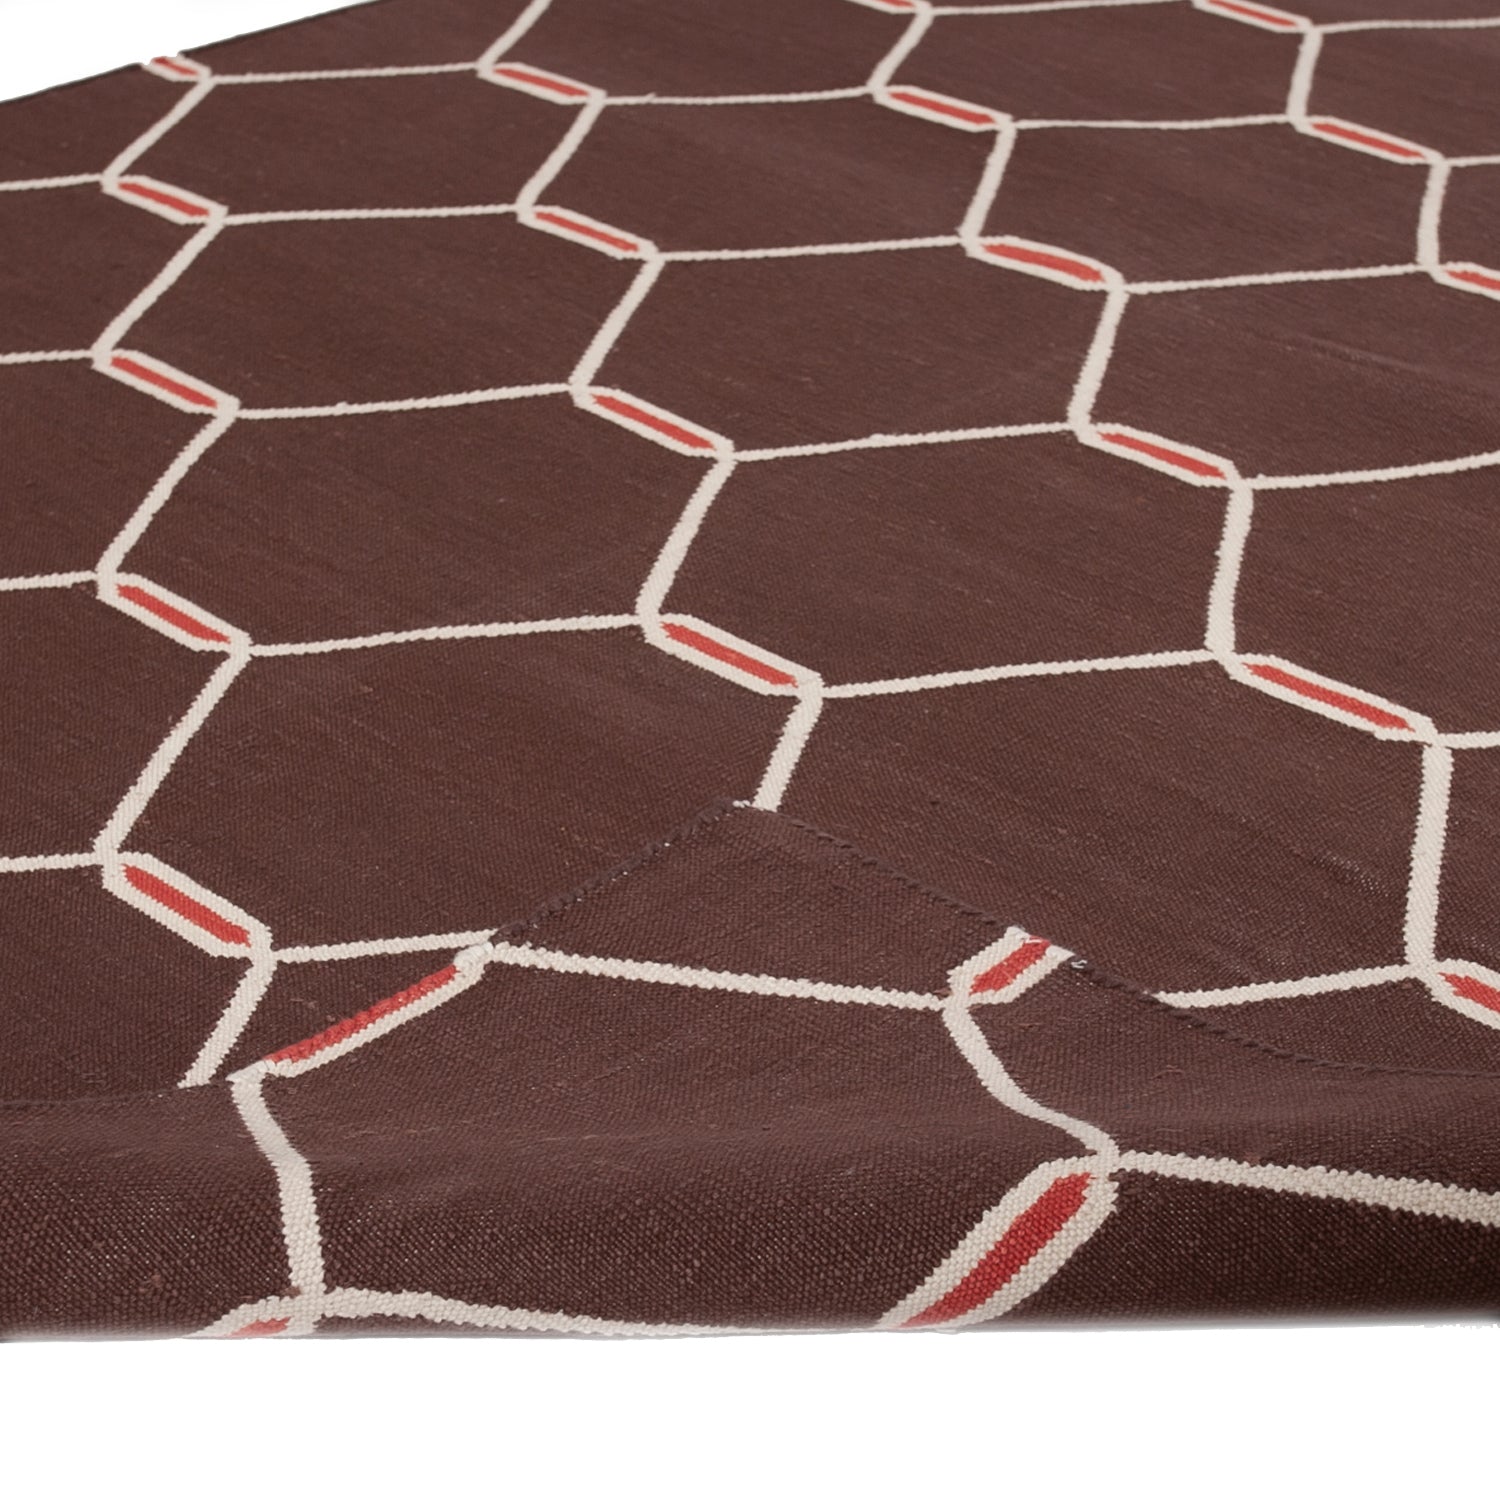 Close-up of textured fabric with regular geometric pattern in brown.